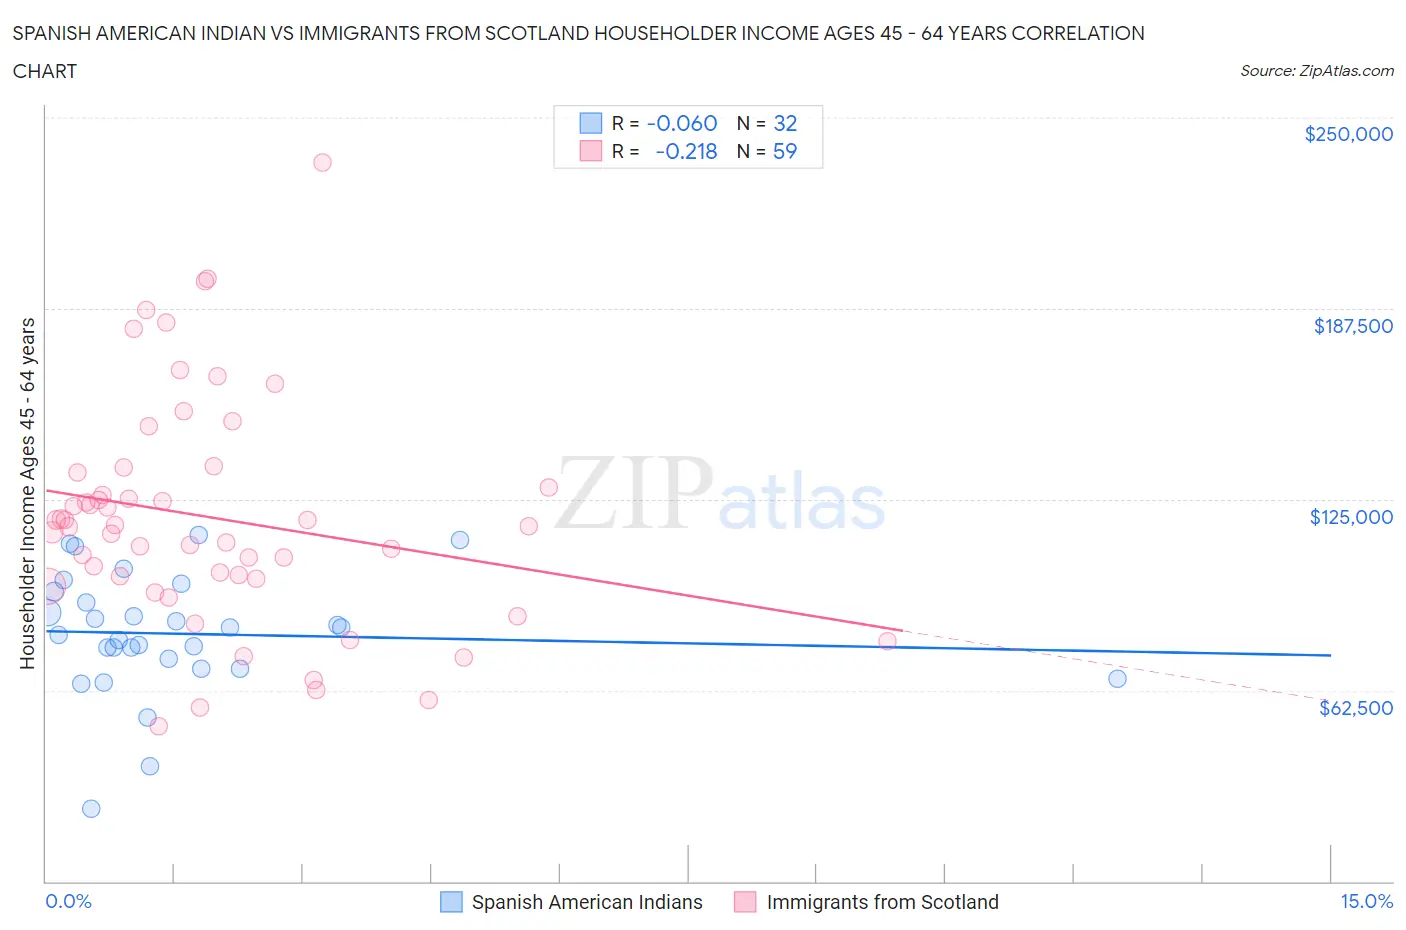 Spanish American Indian vs Immigrants from Scotland Householder Income Ages 45 - 64 years